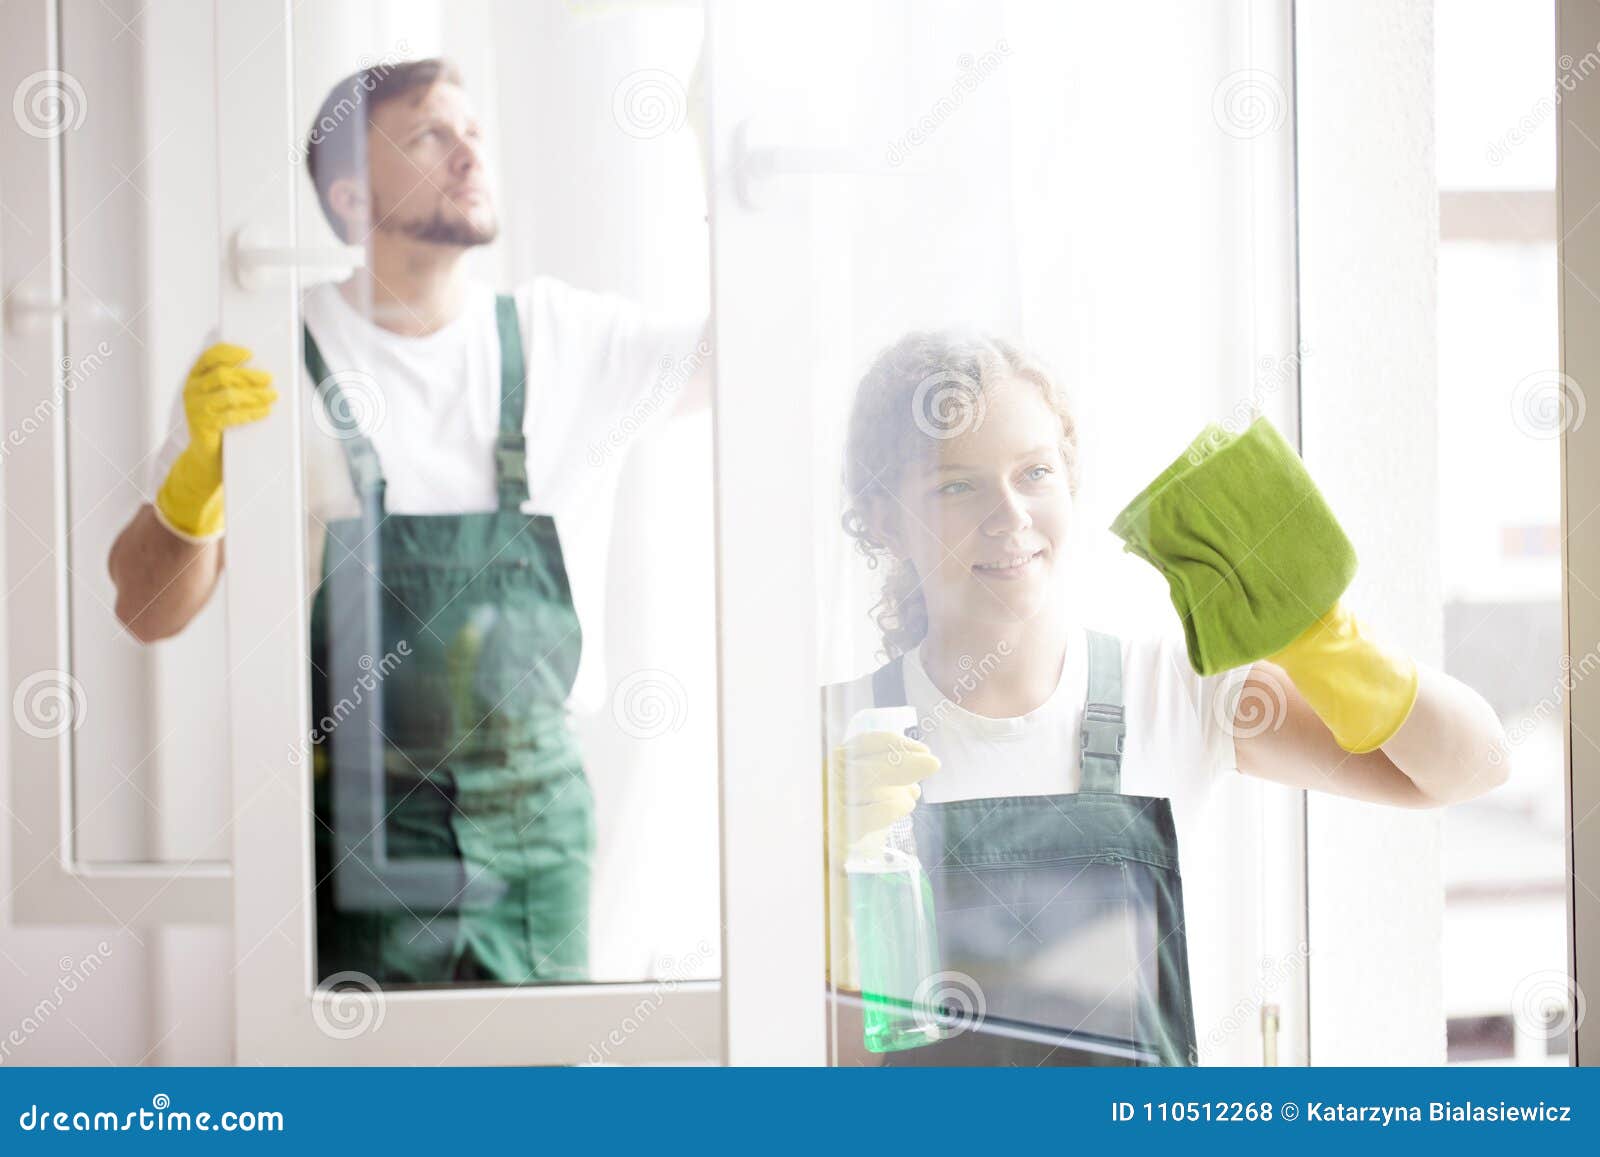 professional cleaners cleaning windows